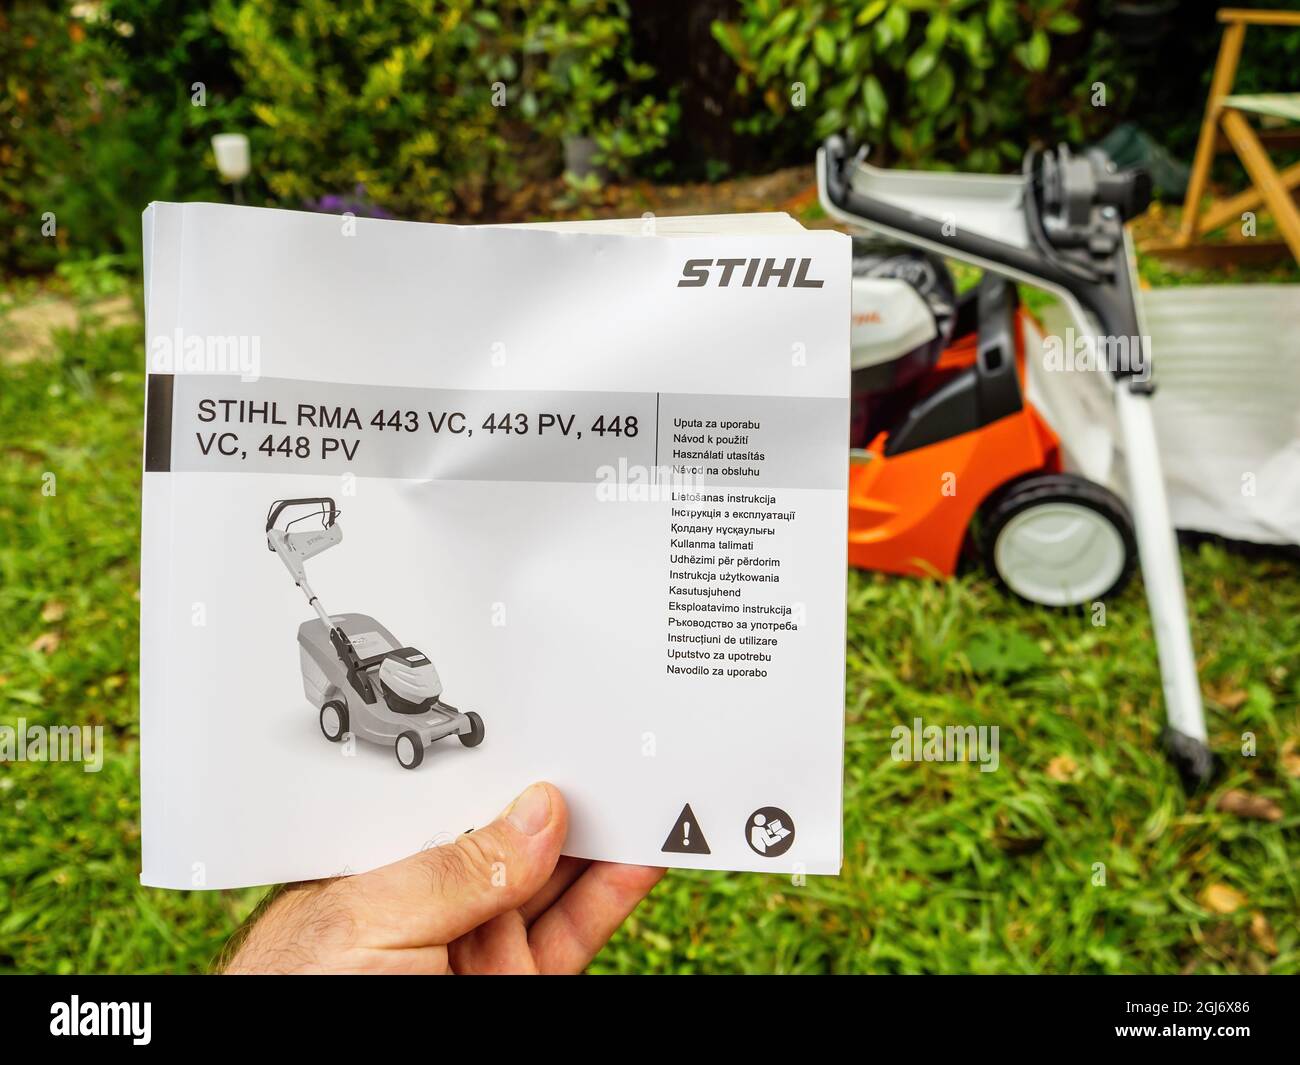 Stihl RMA 443 PV VC 448 lawn mower instruction manual with the product in  background Stock Photo - Alamy